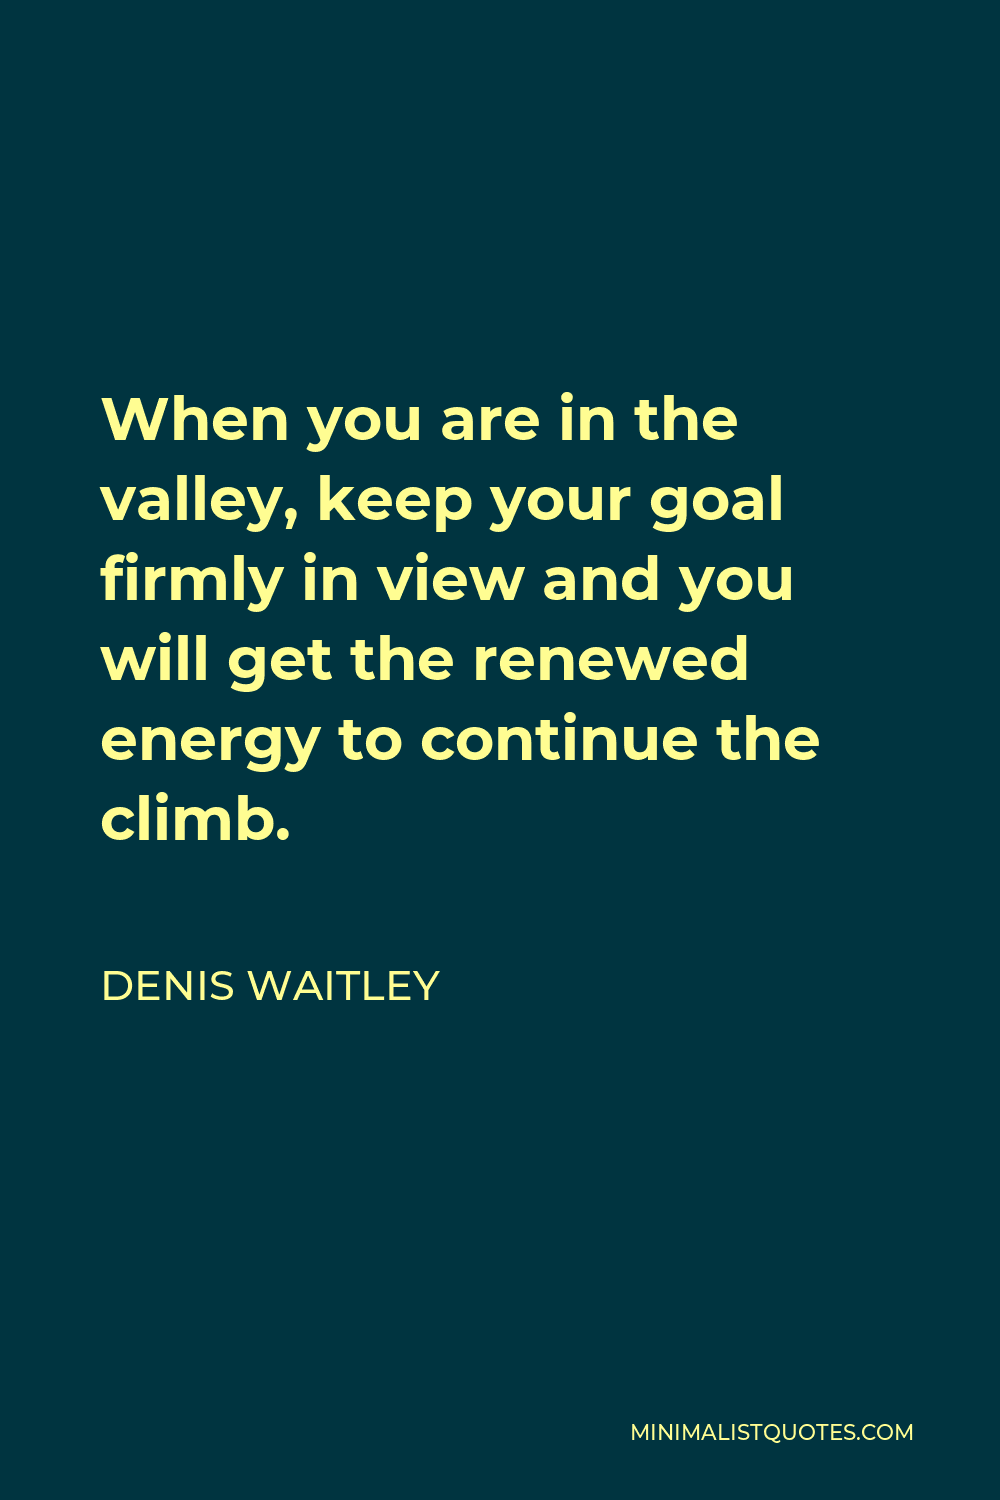 Denis Waitley Quote - When you are in the valley, keep your goal firmly in view and you will get the renewed energy to continue the climb.